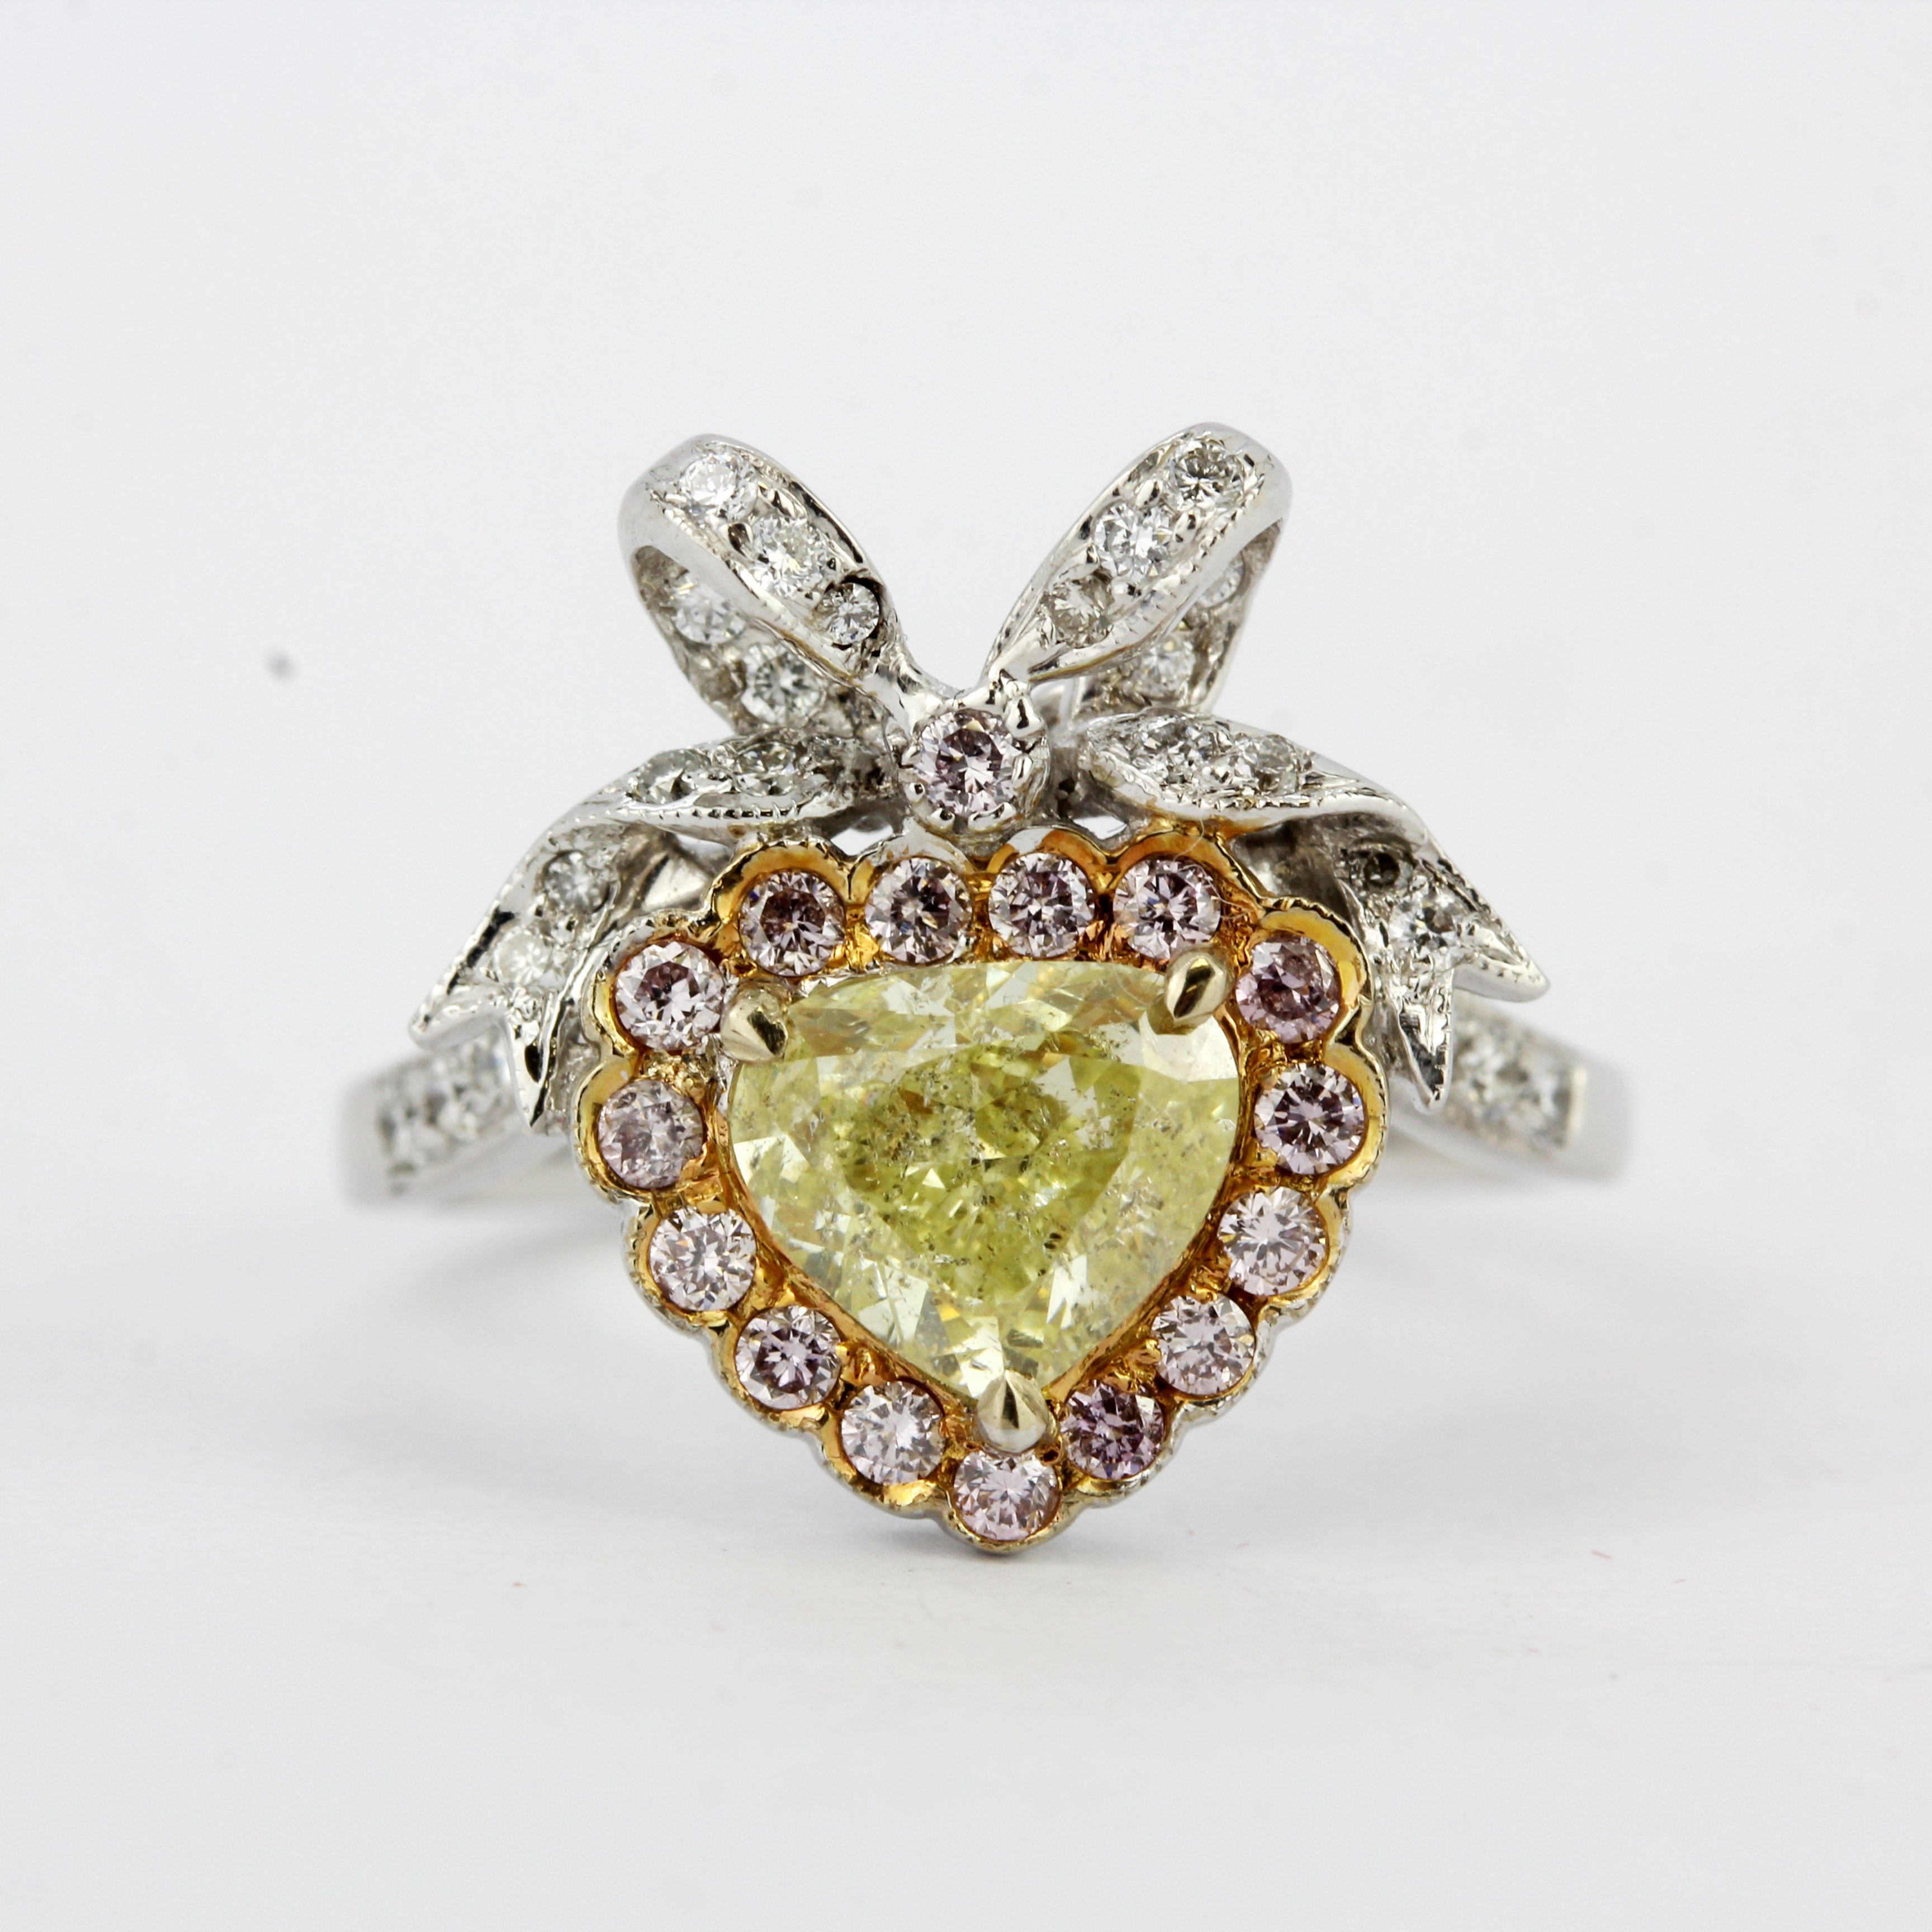 An 18ct white gold ring set with a heart brilliant cut fancy yellow diamond, surrounded by pink